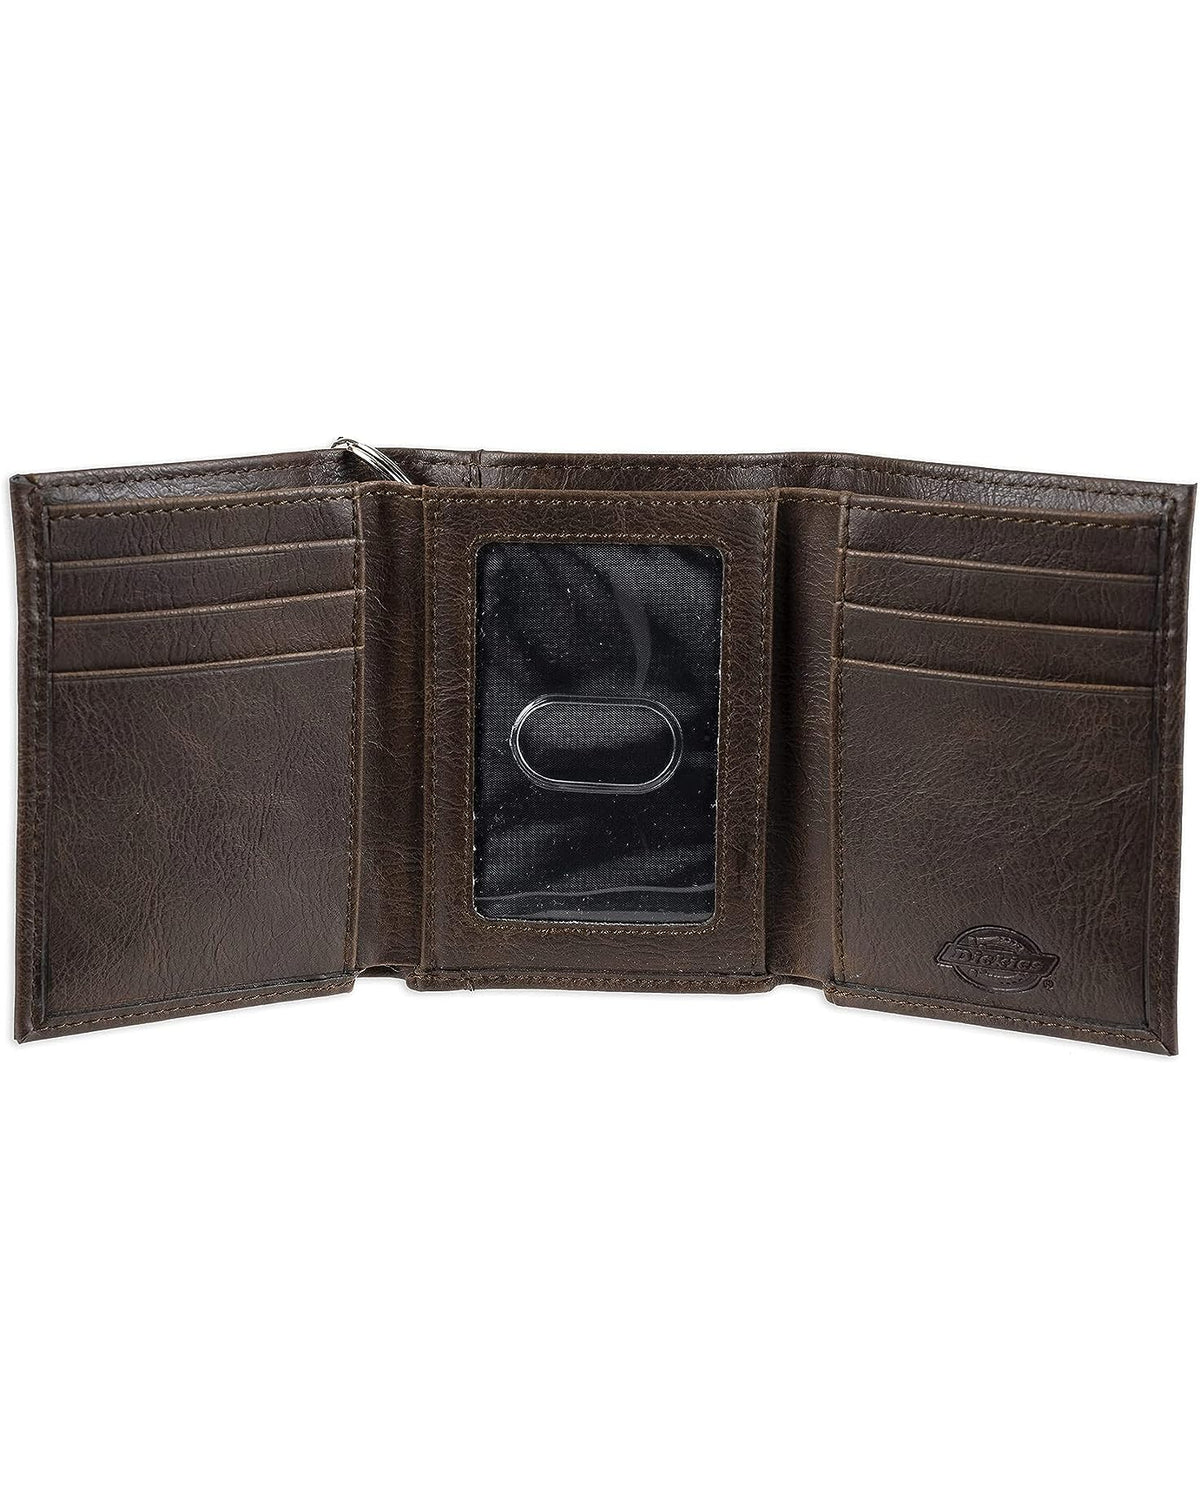 Dickies Men's Trifold Leather Chain Wallet Brown